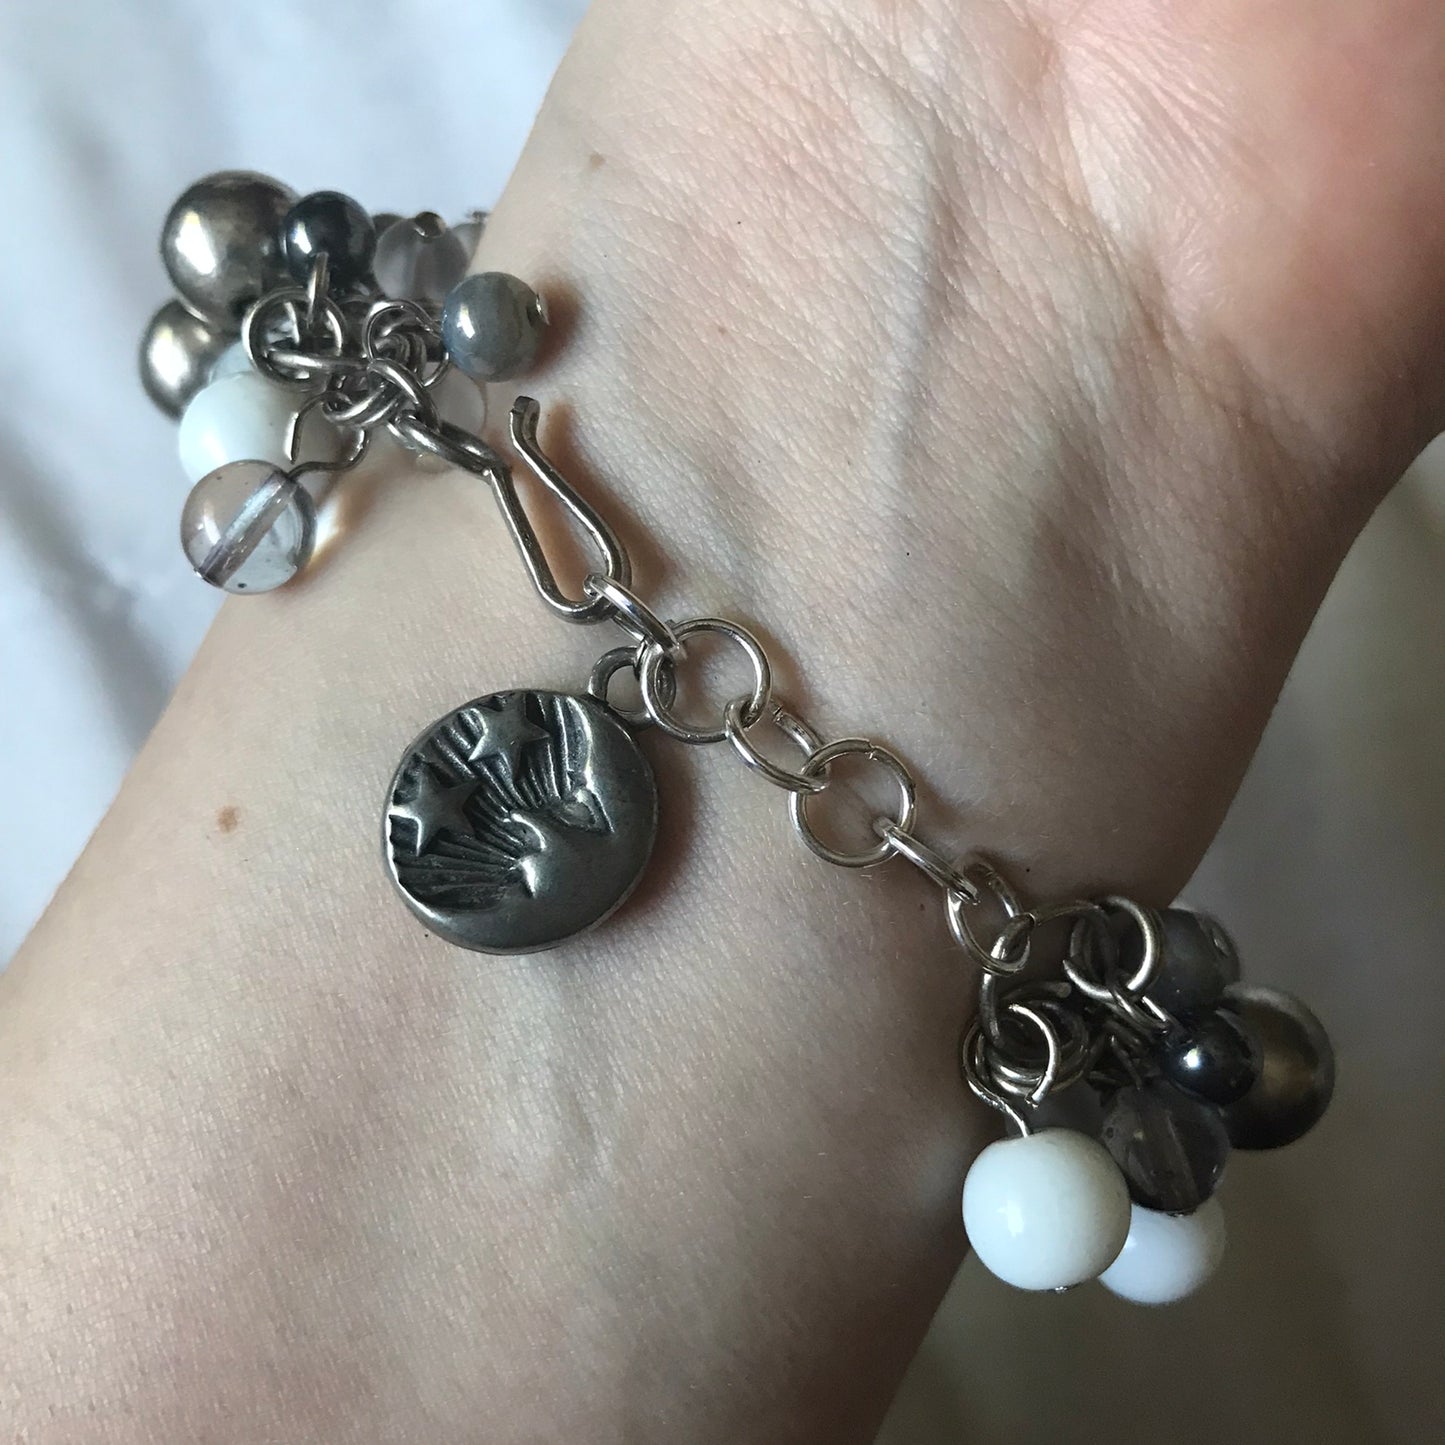 CELESTIAL CHARM BRACELET ON THE WRIST SHOWING THE CLASP  WITH THE MOON & STAR SIDE OF THE EXTENSION CHARM